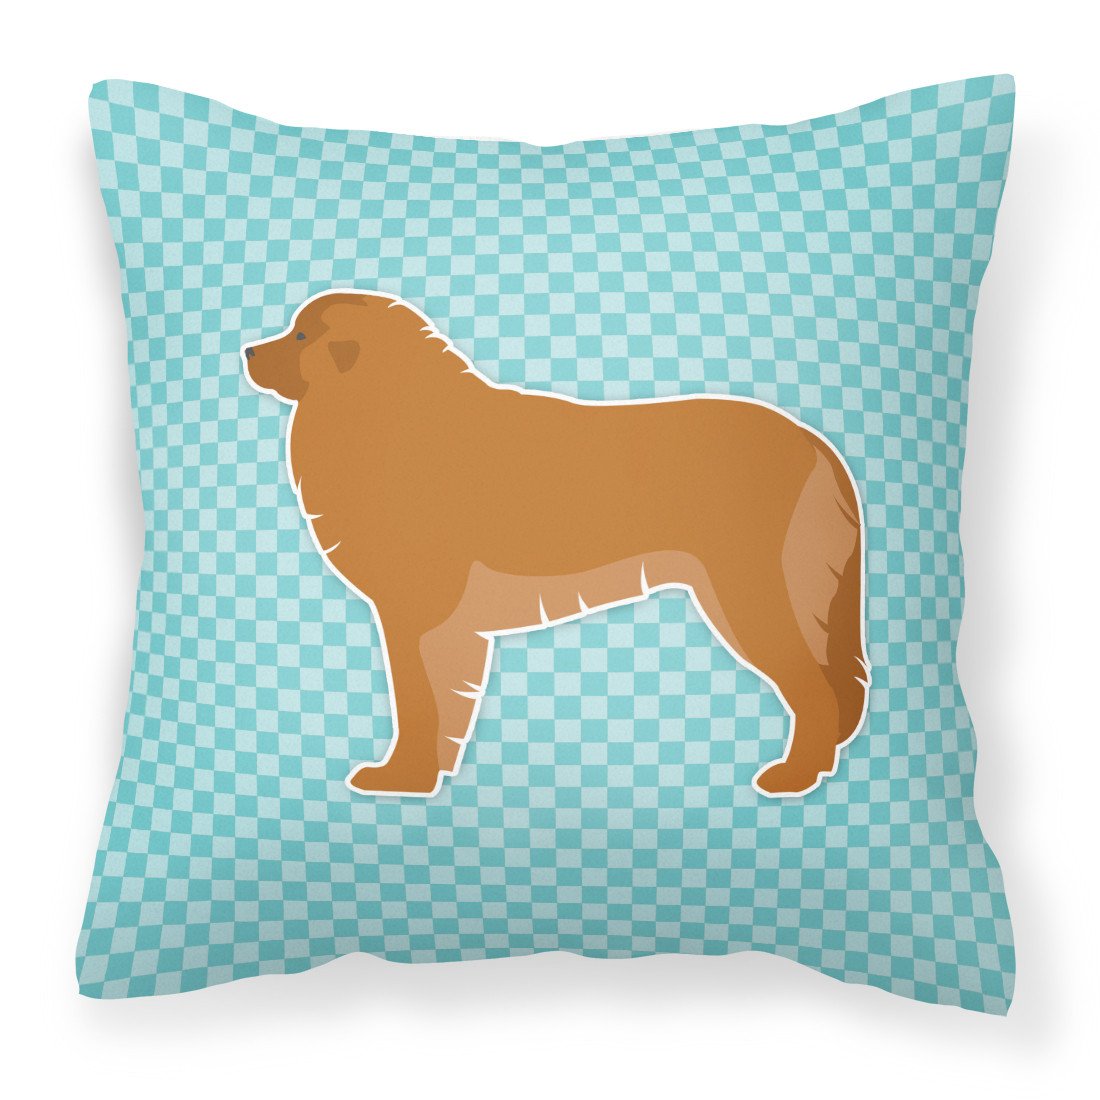 Leonberger Checkerboard Blue Fabric Decorative Pillow BB3758PW1818 by Caroline's Treasures